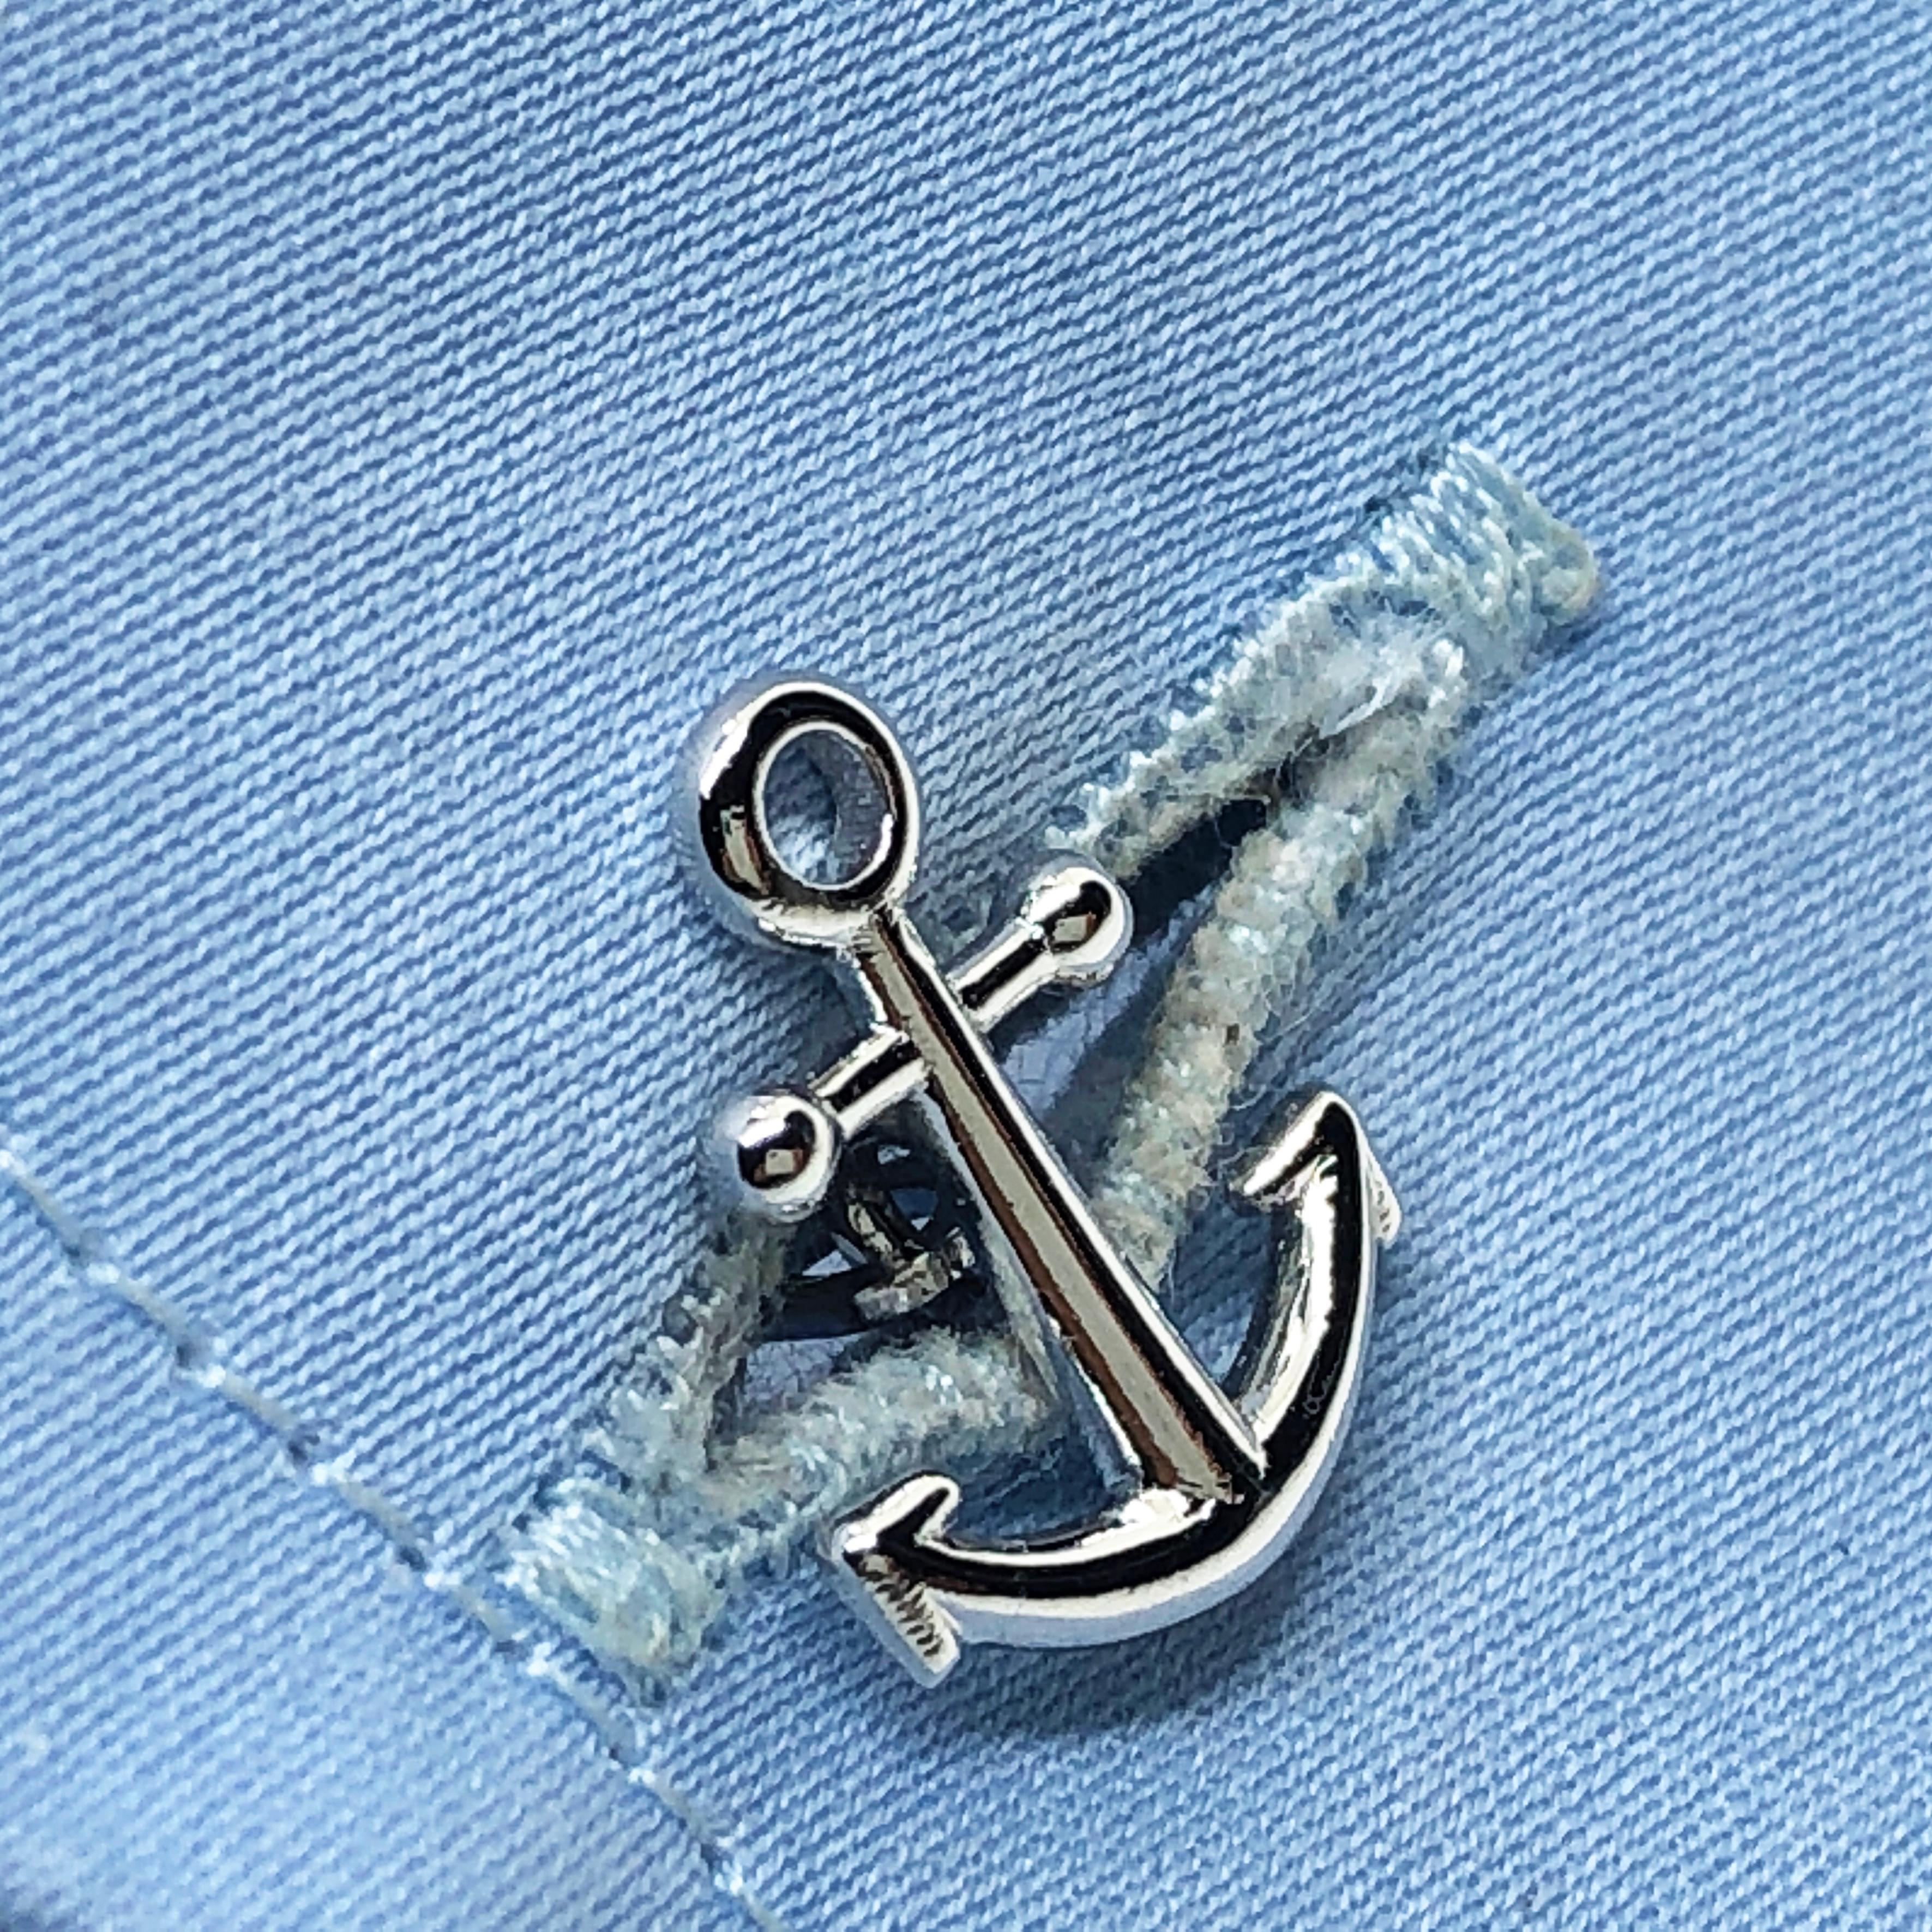 Berca Blue White Red Sailing Boat Little Anchor Back Sterling Silver Cufflinks 5